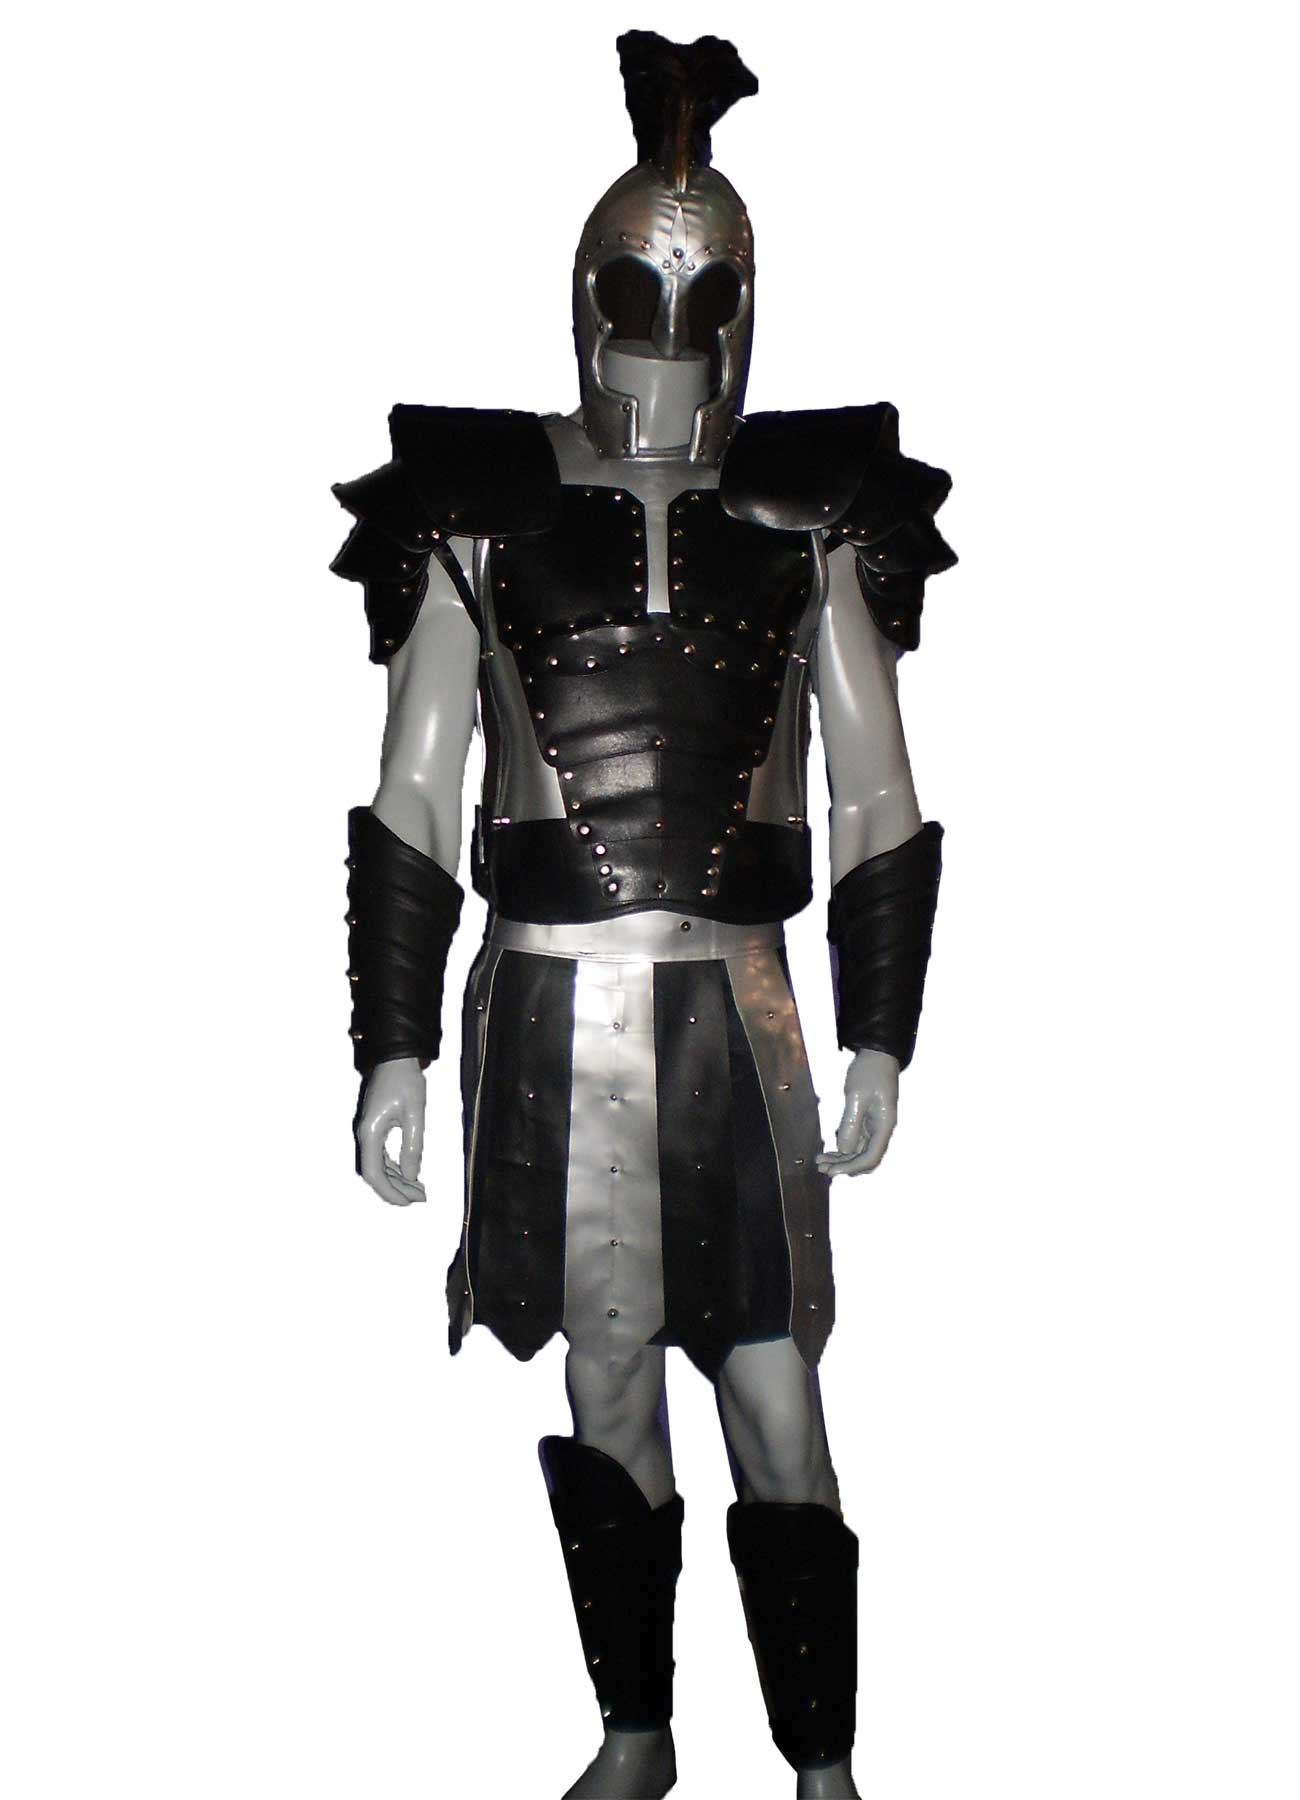 Find Out More About CCM - Your Cheap Costume Rental Company In ...